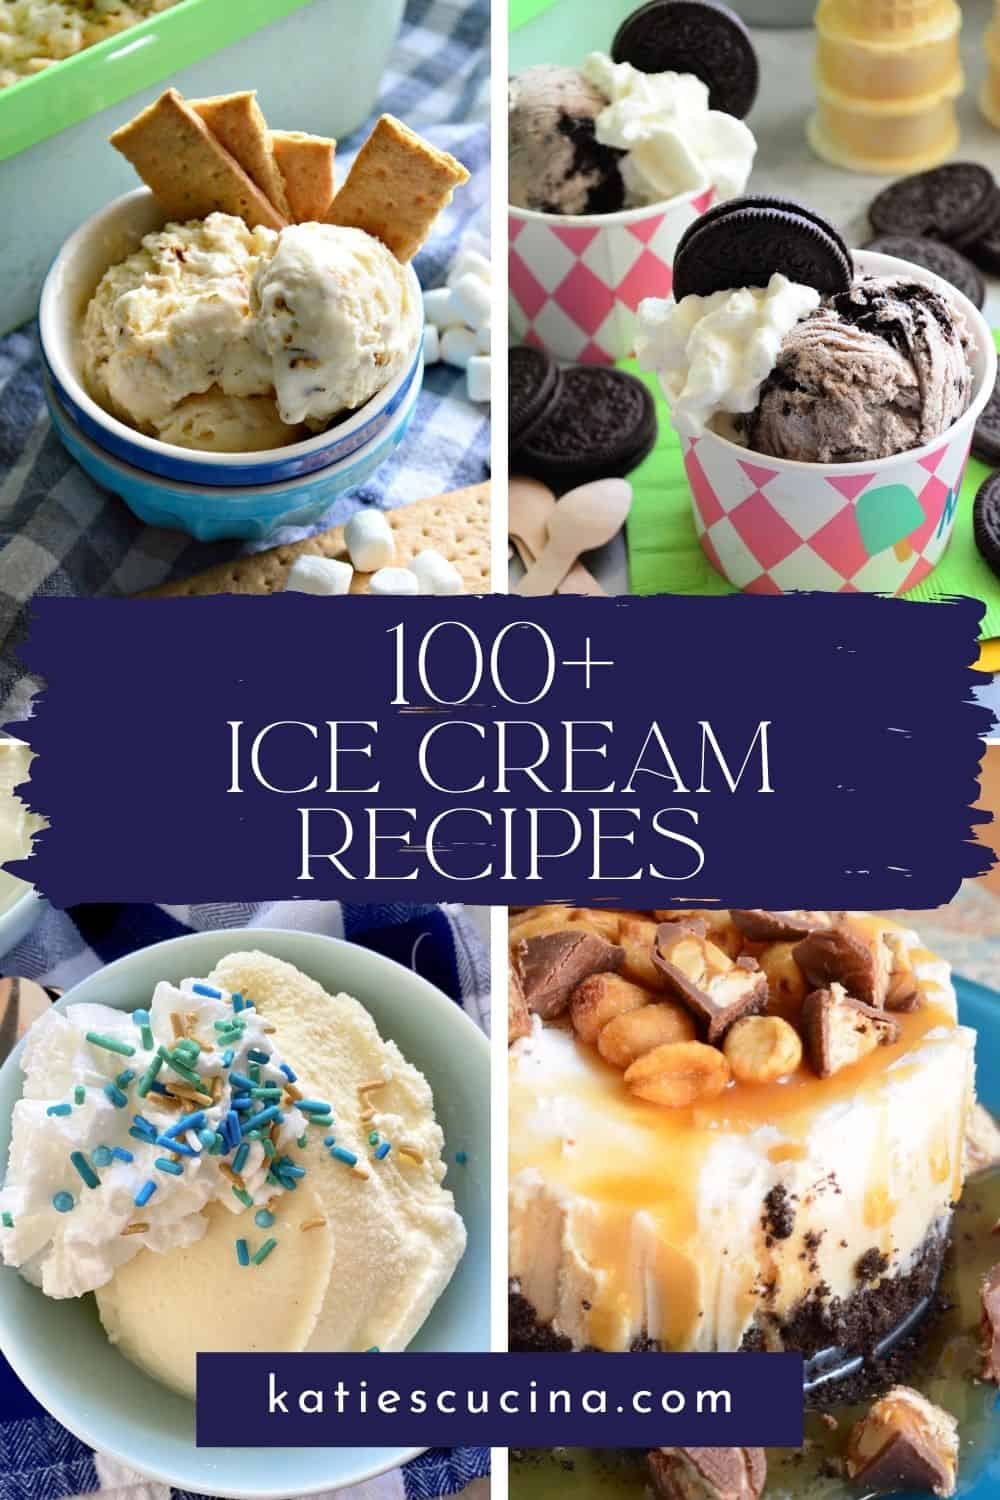 Four photos of ice creams in bowls and as cakes with recipe title text on image for Pinterest.